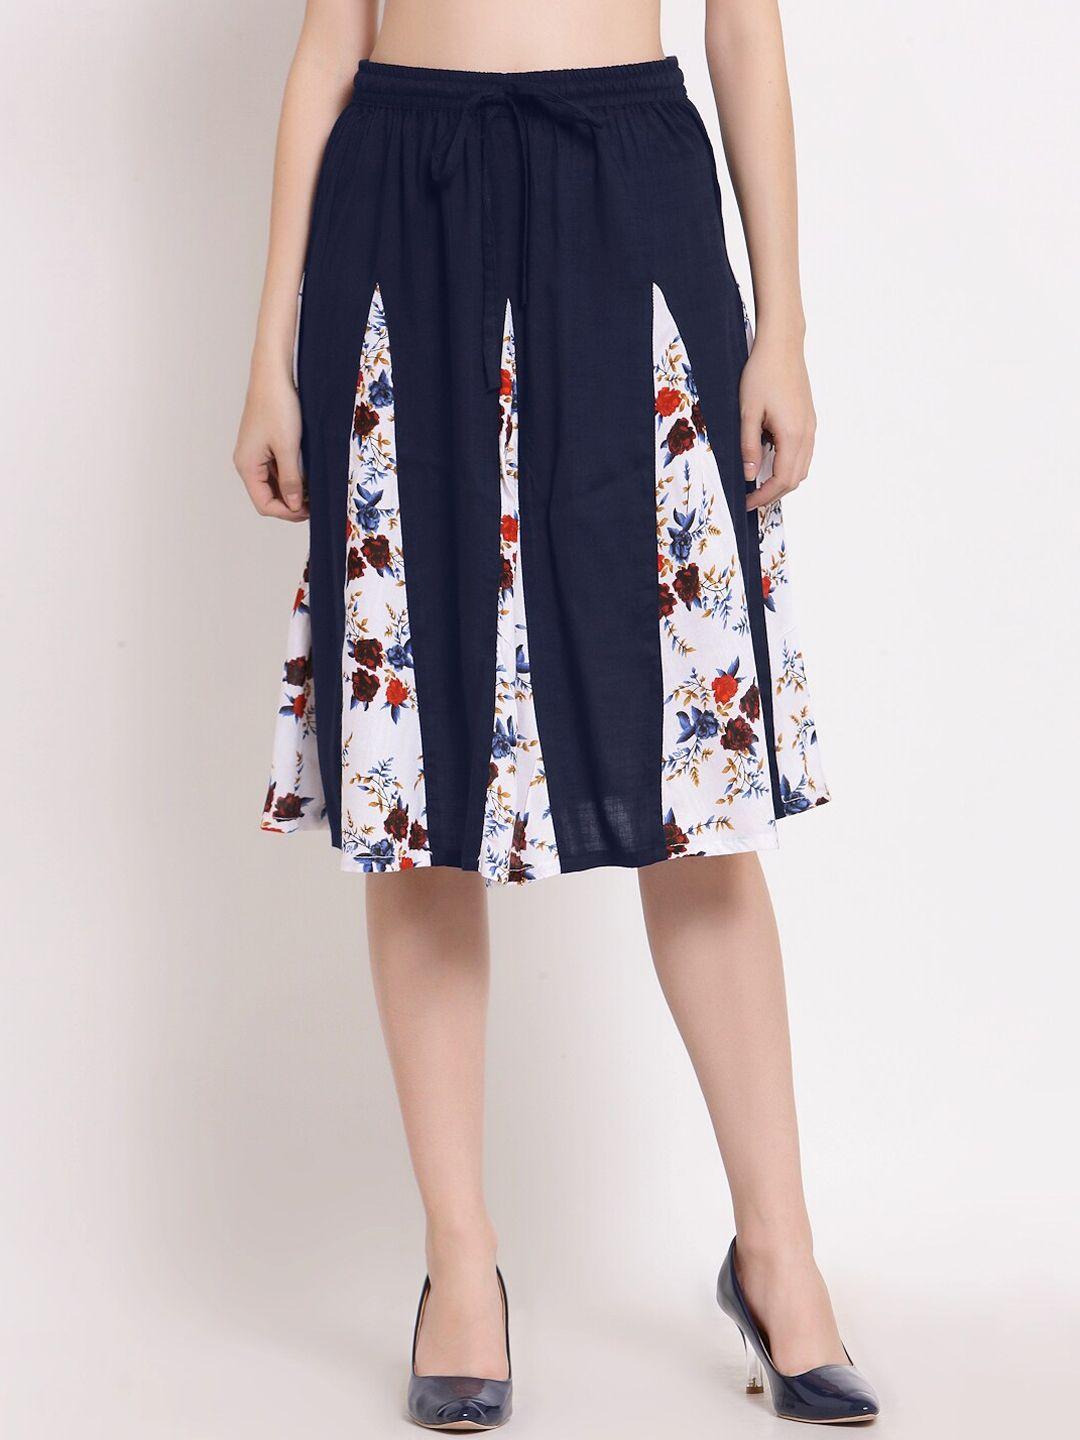 patrorna women navy blue & white printed flared skirt with contrast pleated detailing